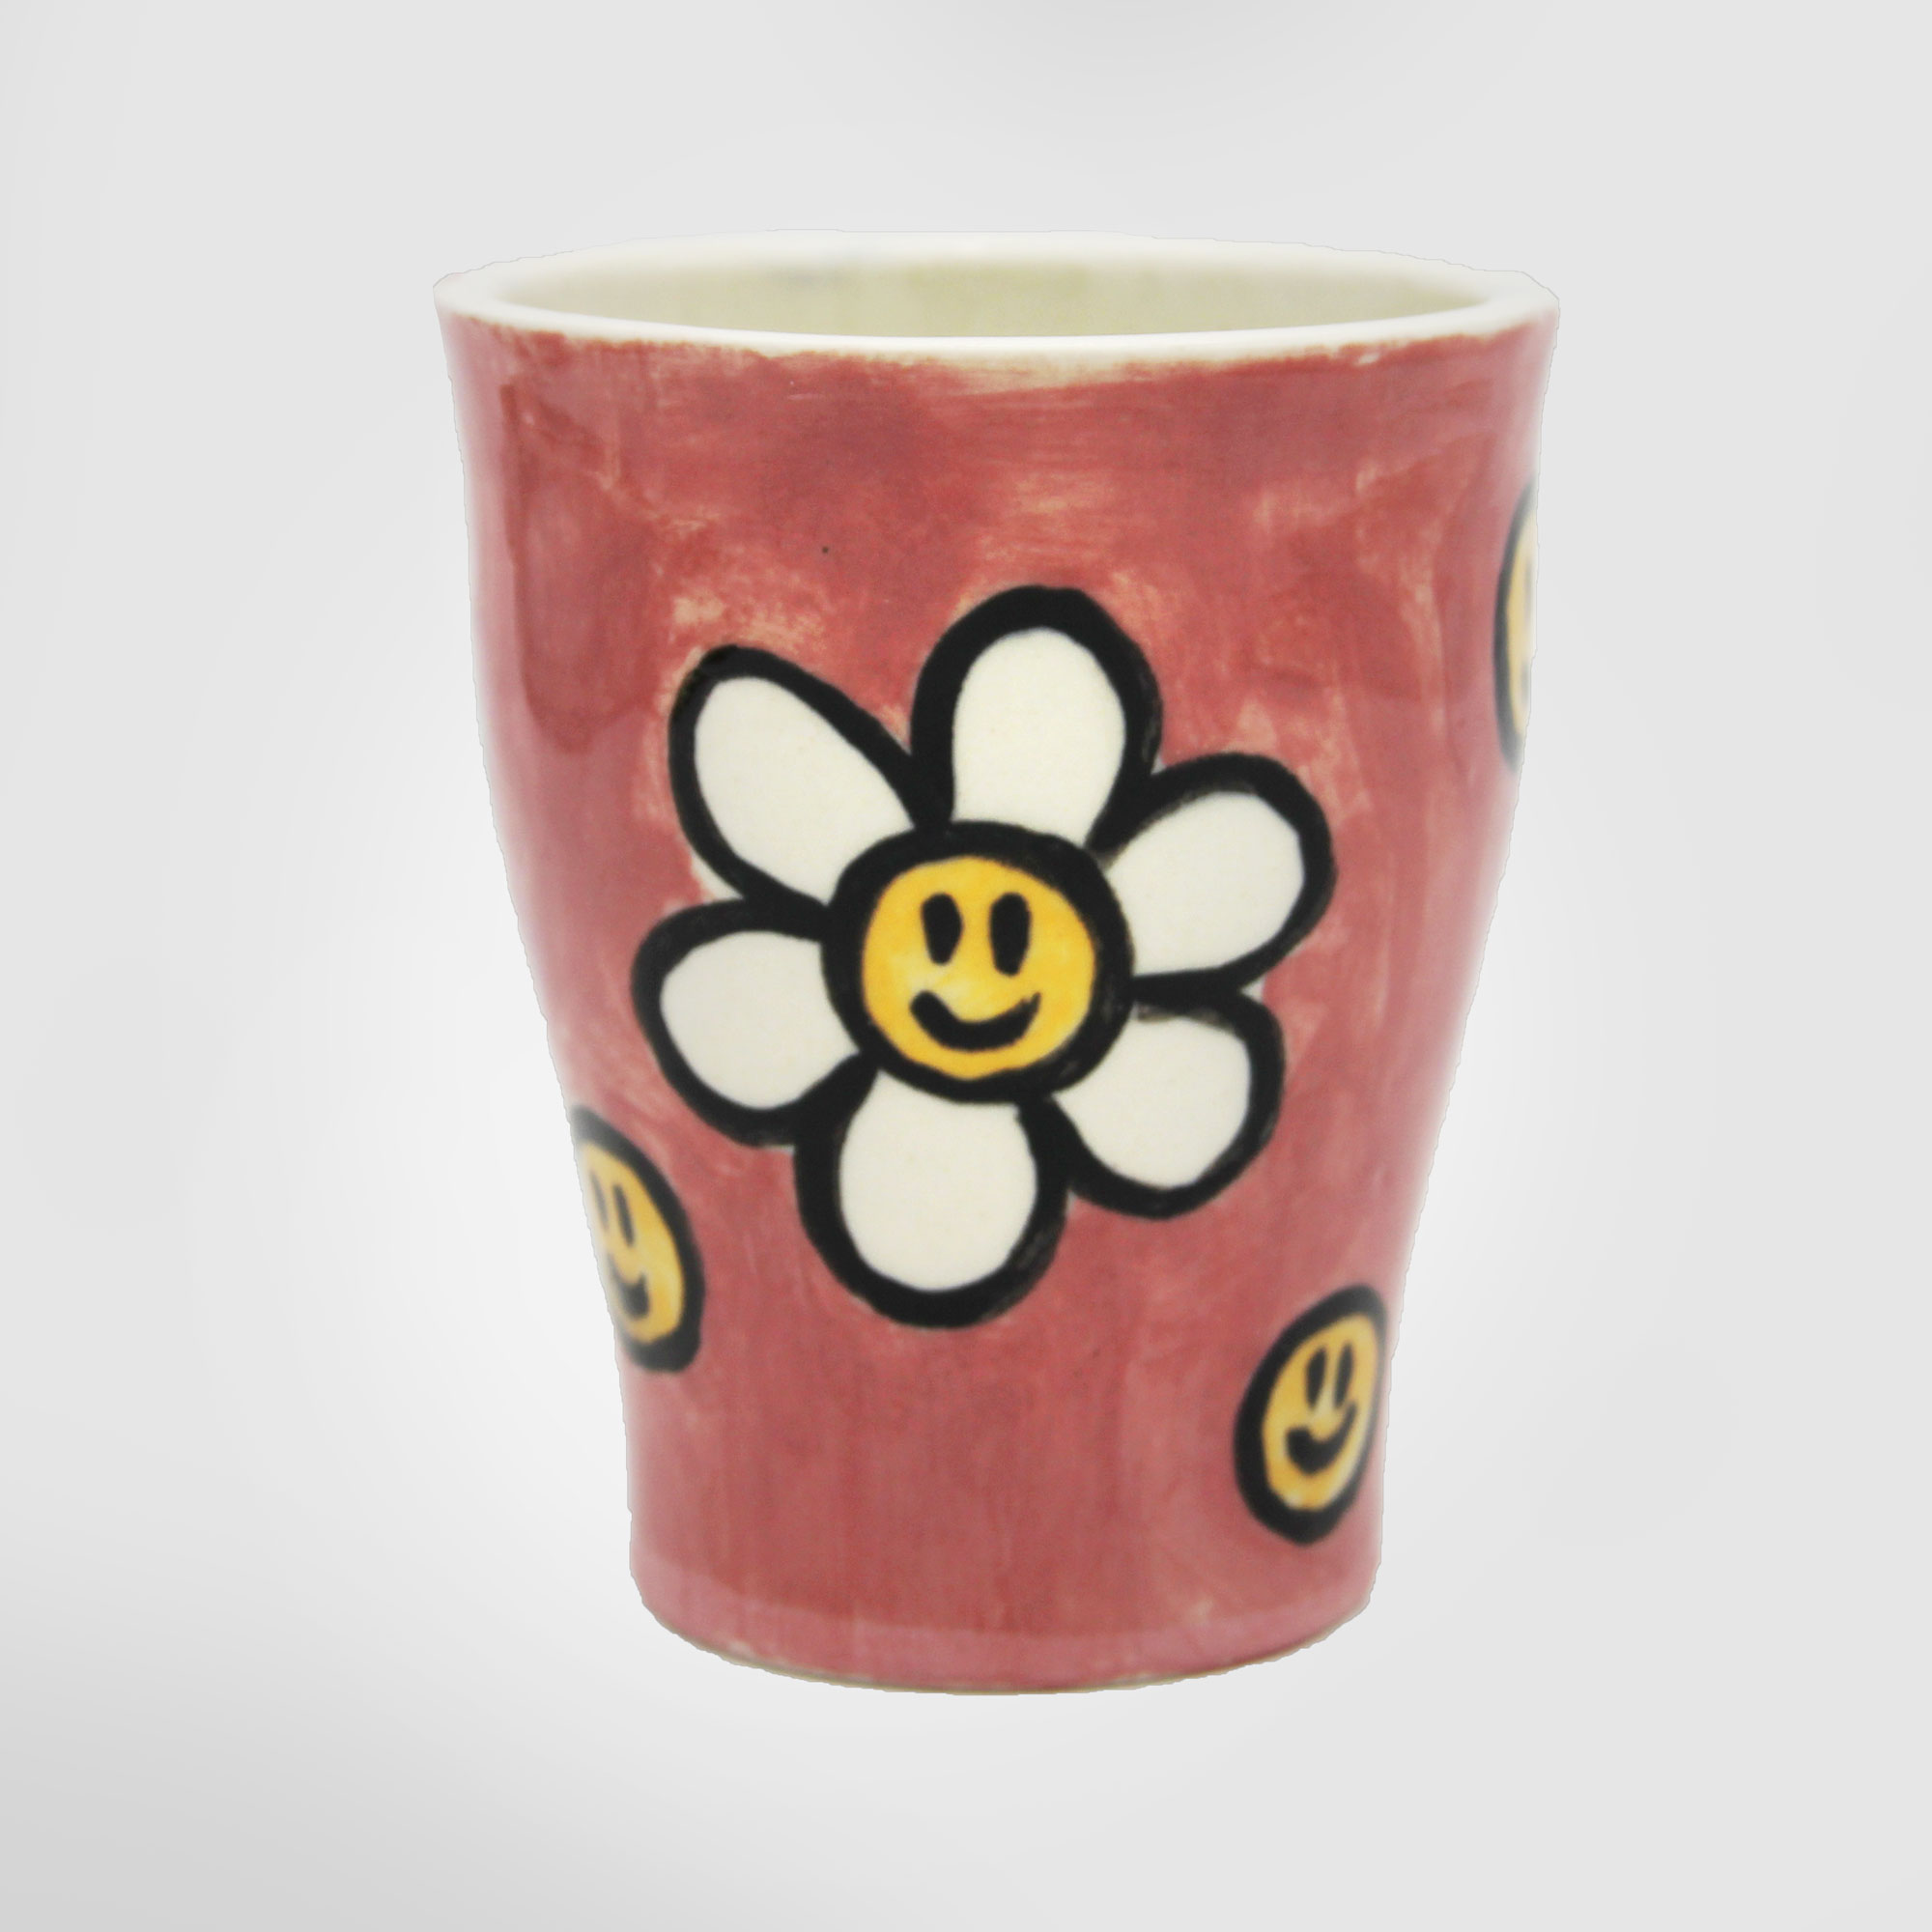 pottery cup